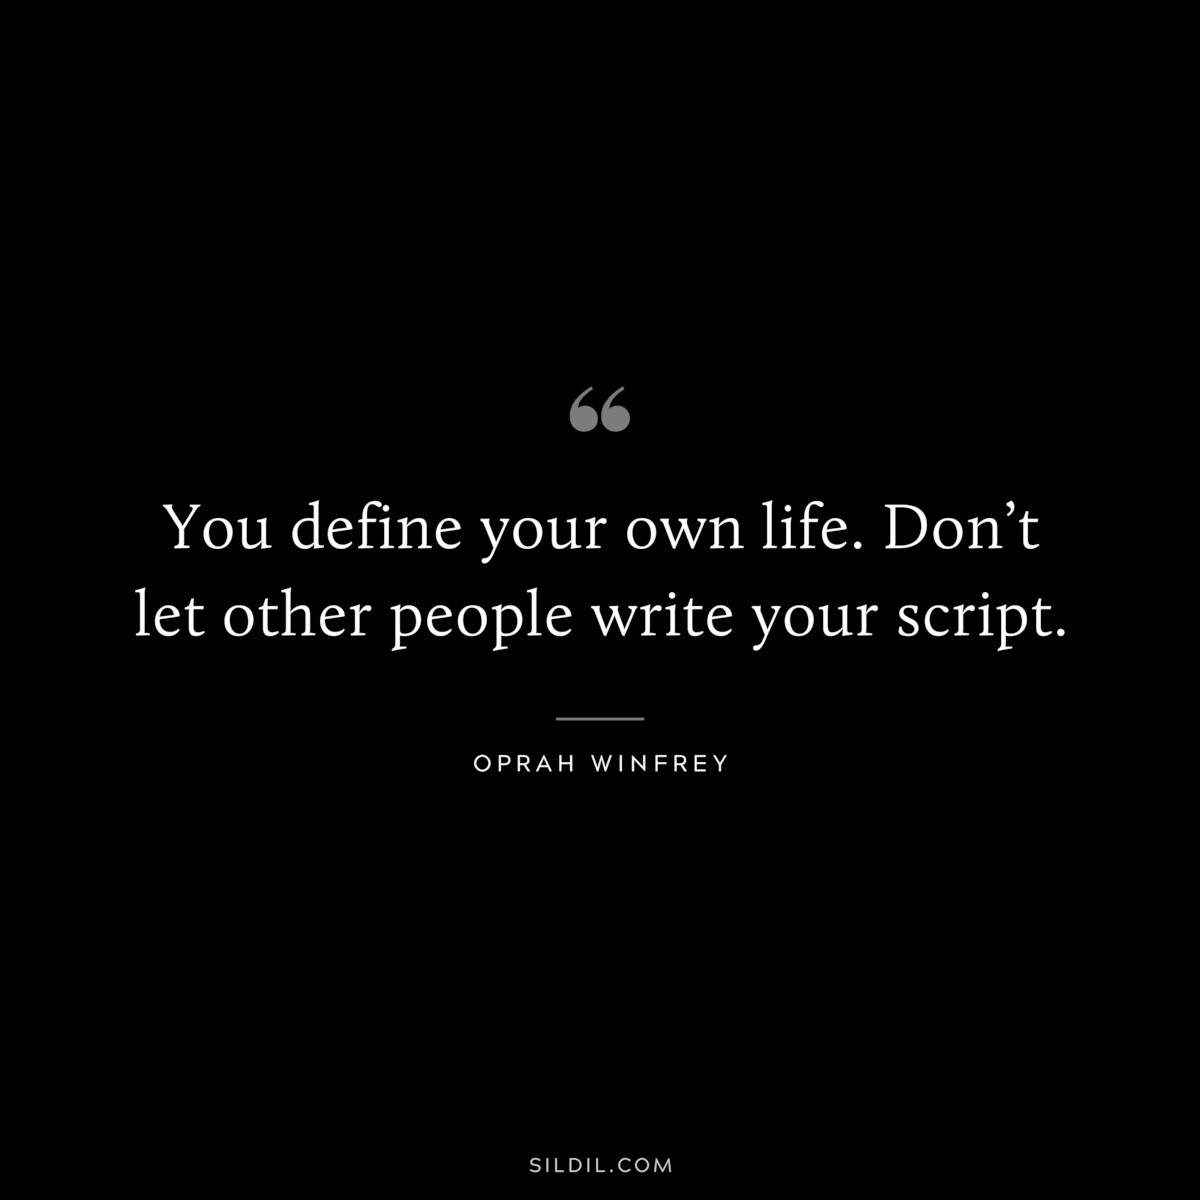 You define your own life. Don’t let other people write your script. ― Oprah Winfrey